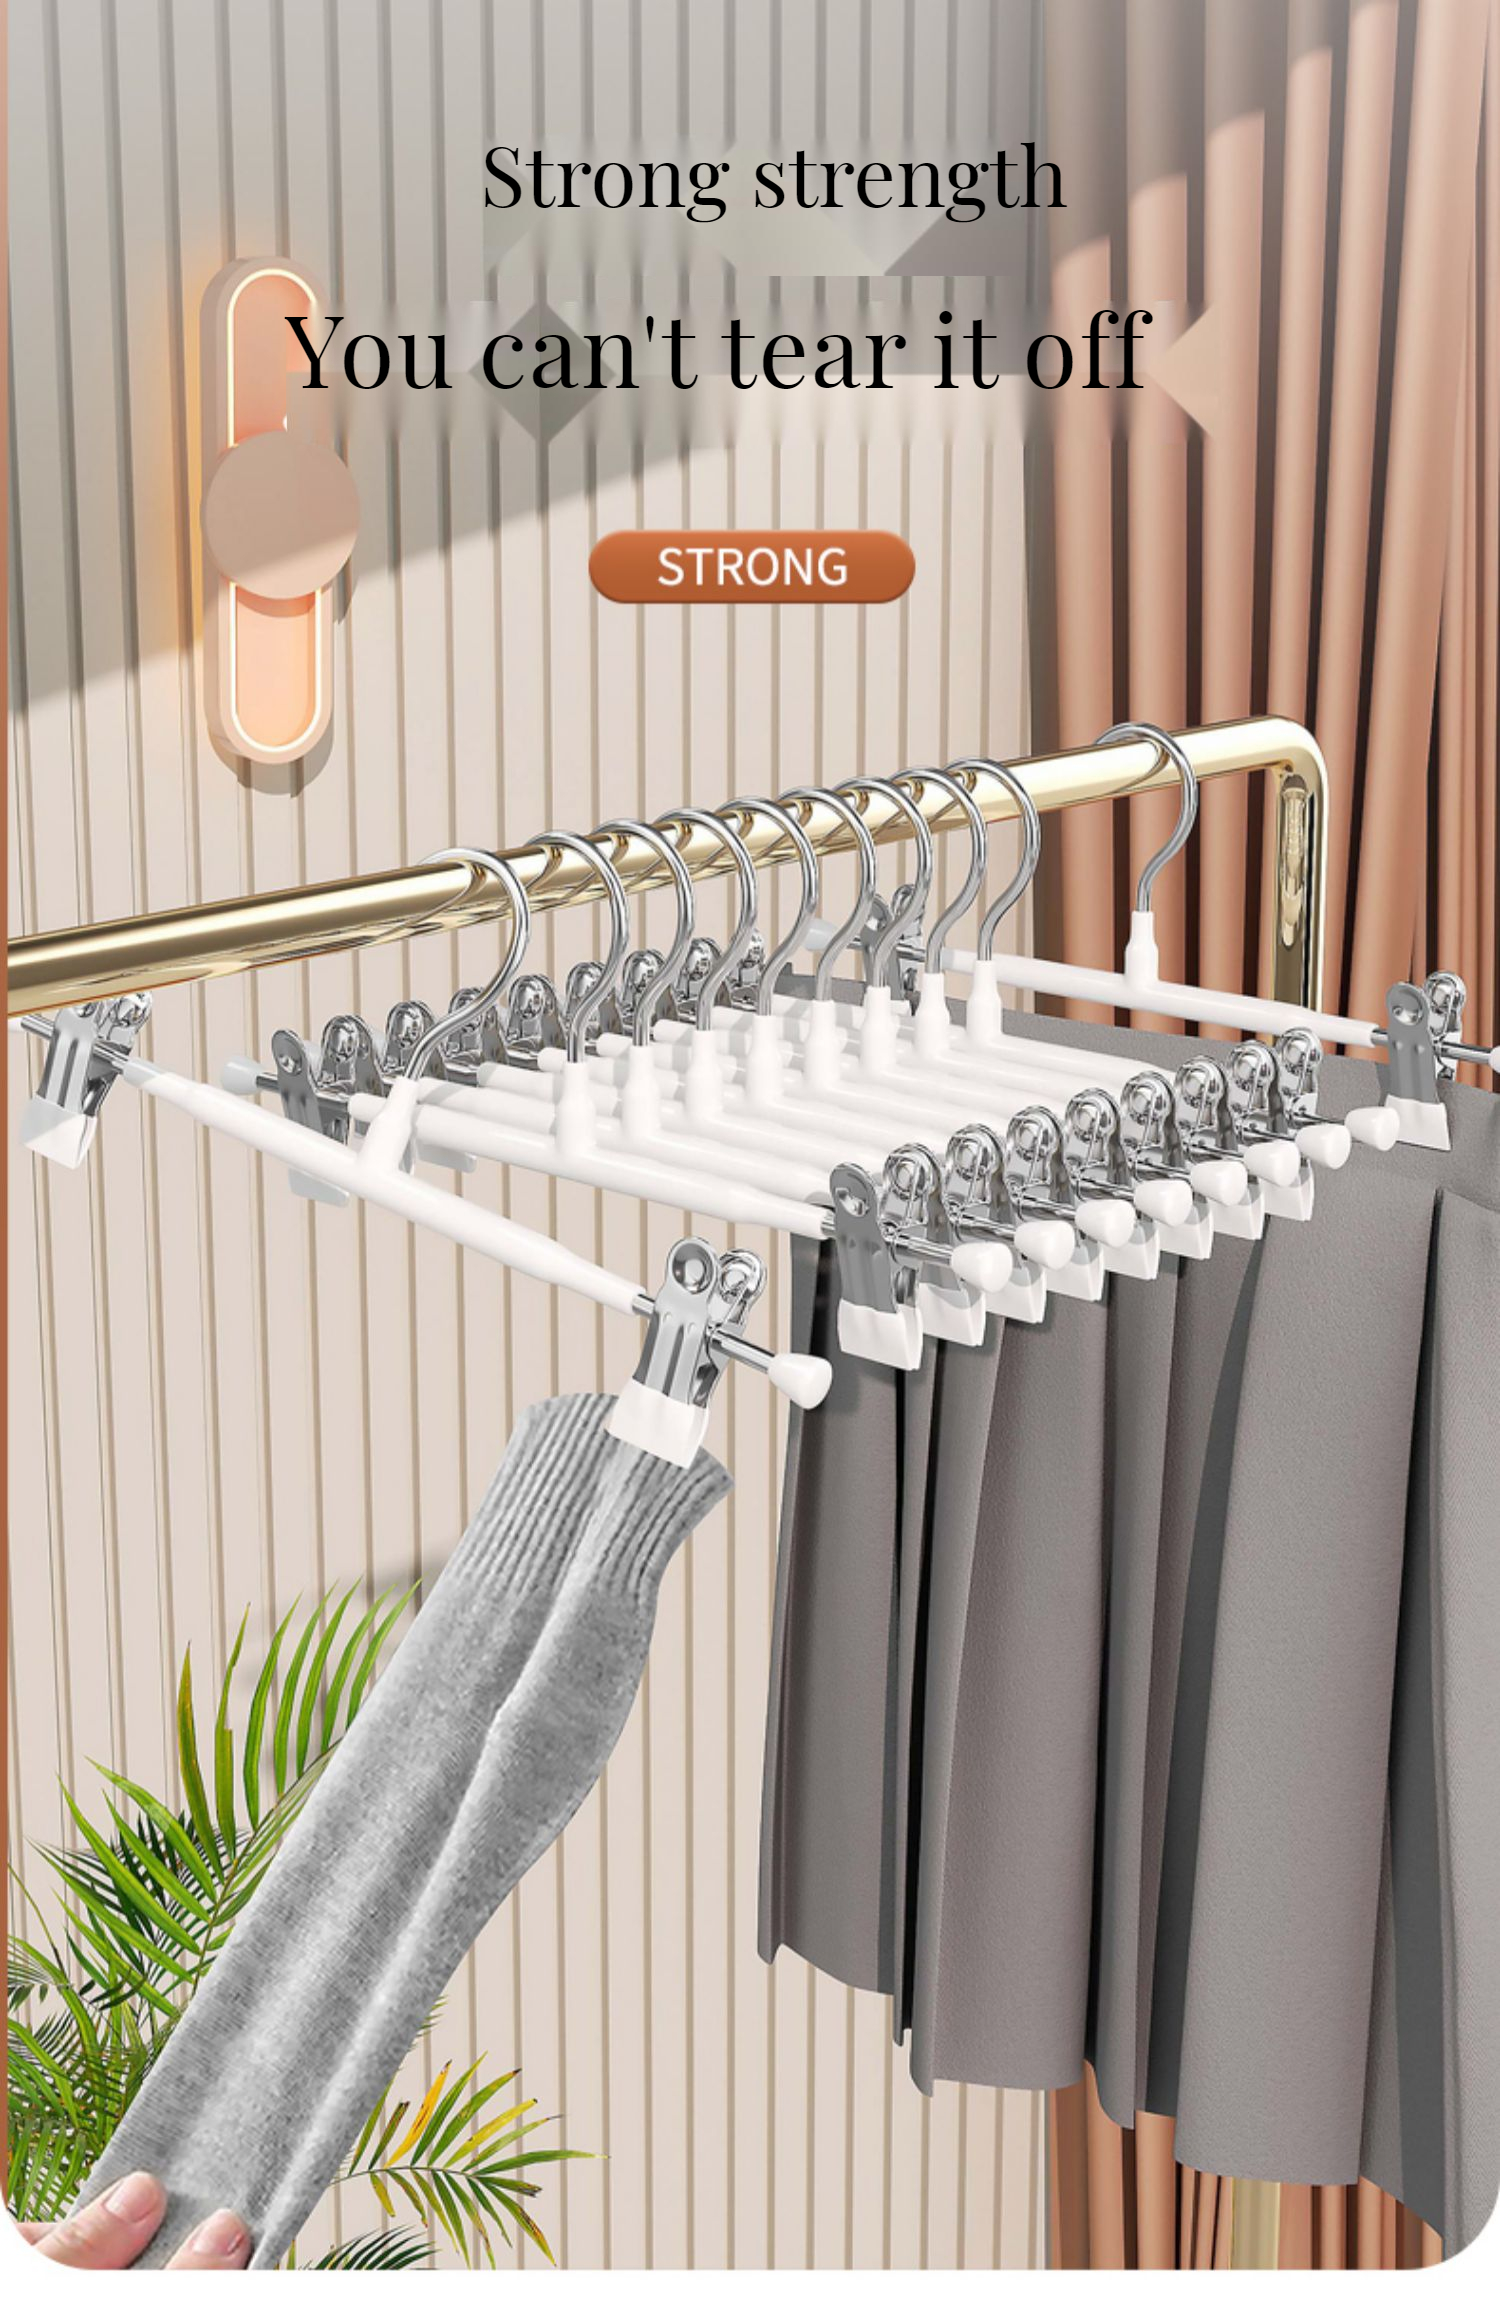 Springcorner 20 Pack Pants Hangers Space Saving, 9-11 Inch Non Slip  Stainless Steel Metal Pants Hanger with Clips, Clothes Hangers for Shorts,  Skirt, Bottoms, Jeans 